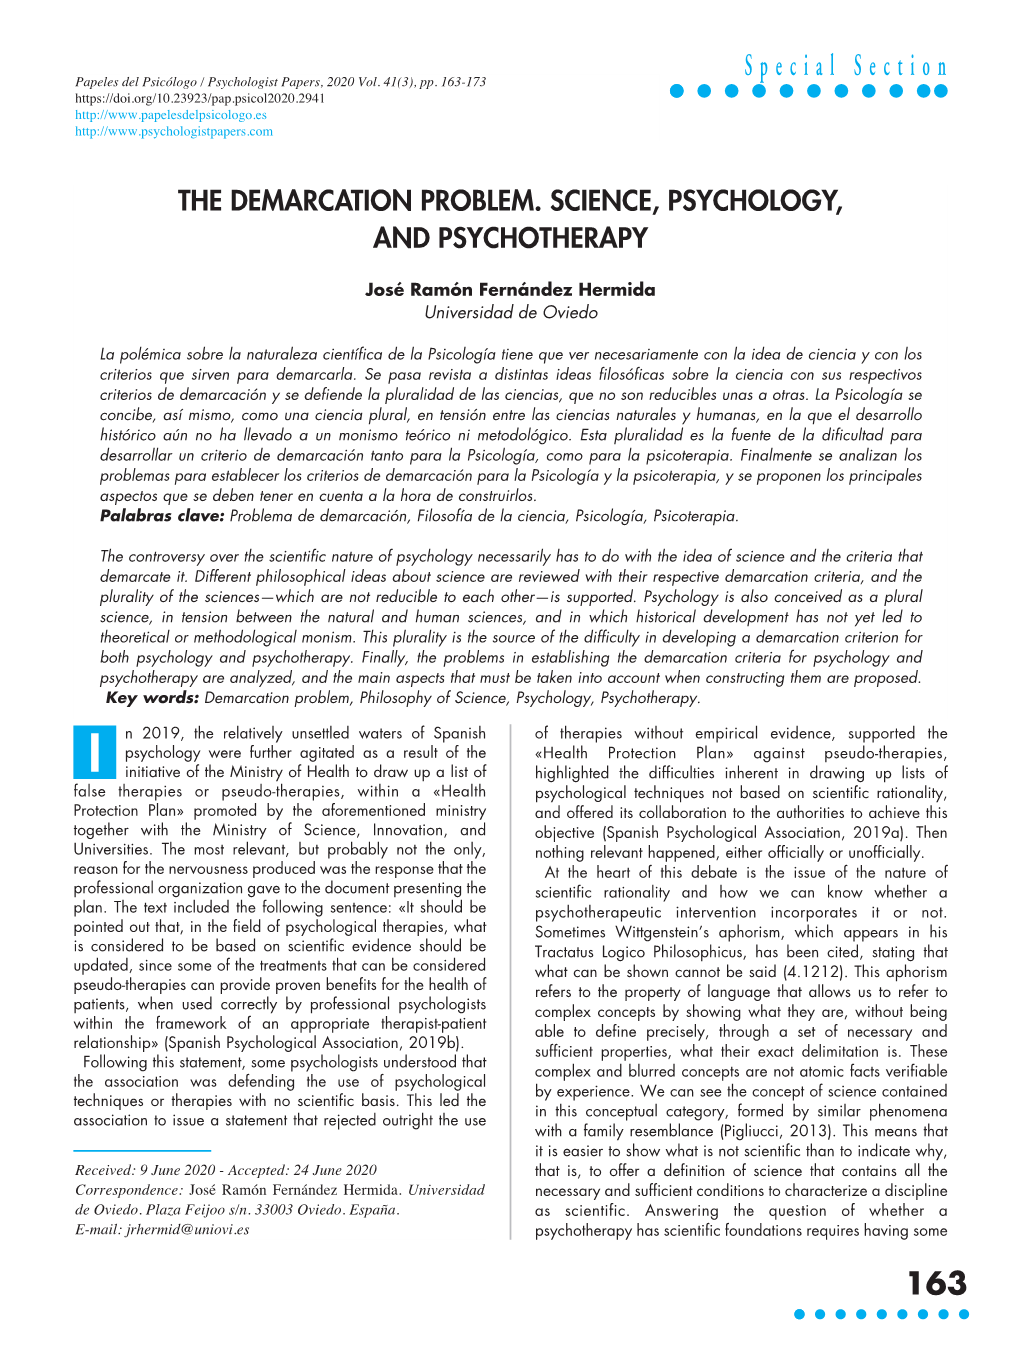 The Demarcation Problem. Science, Psychology, and Psychotherapy